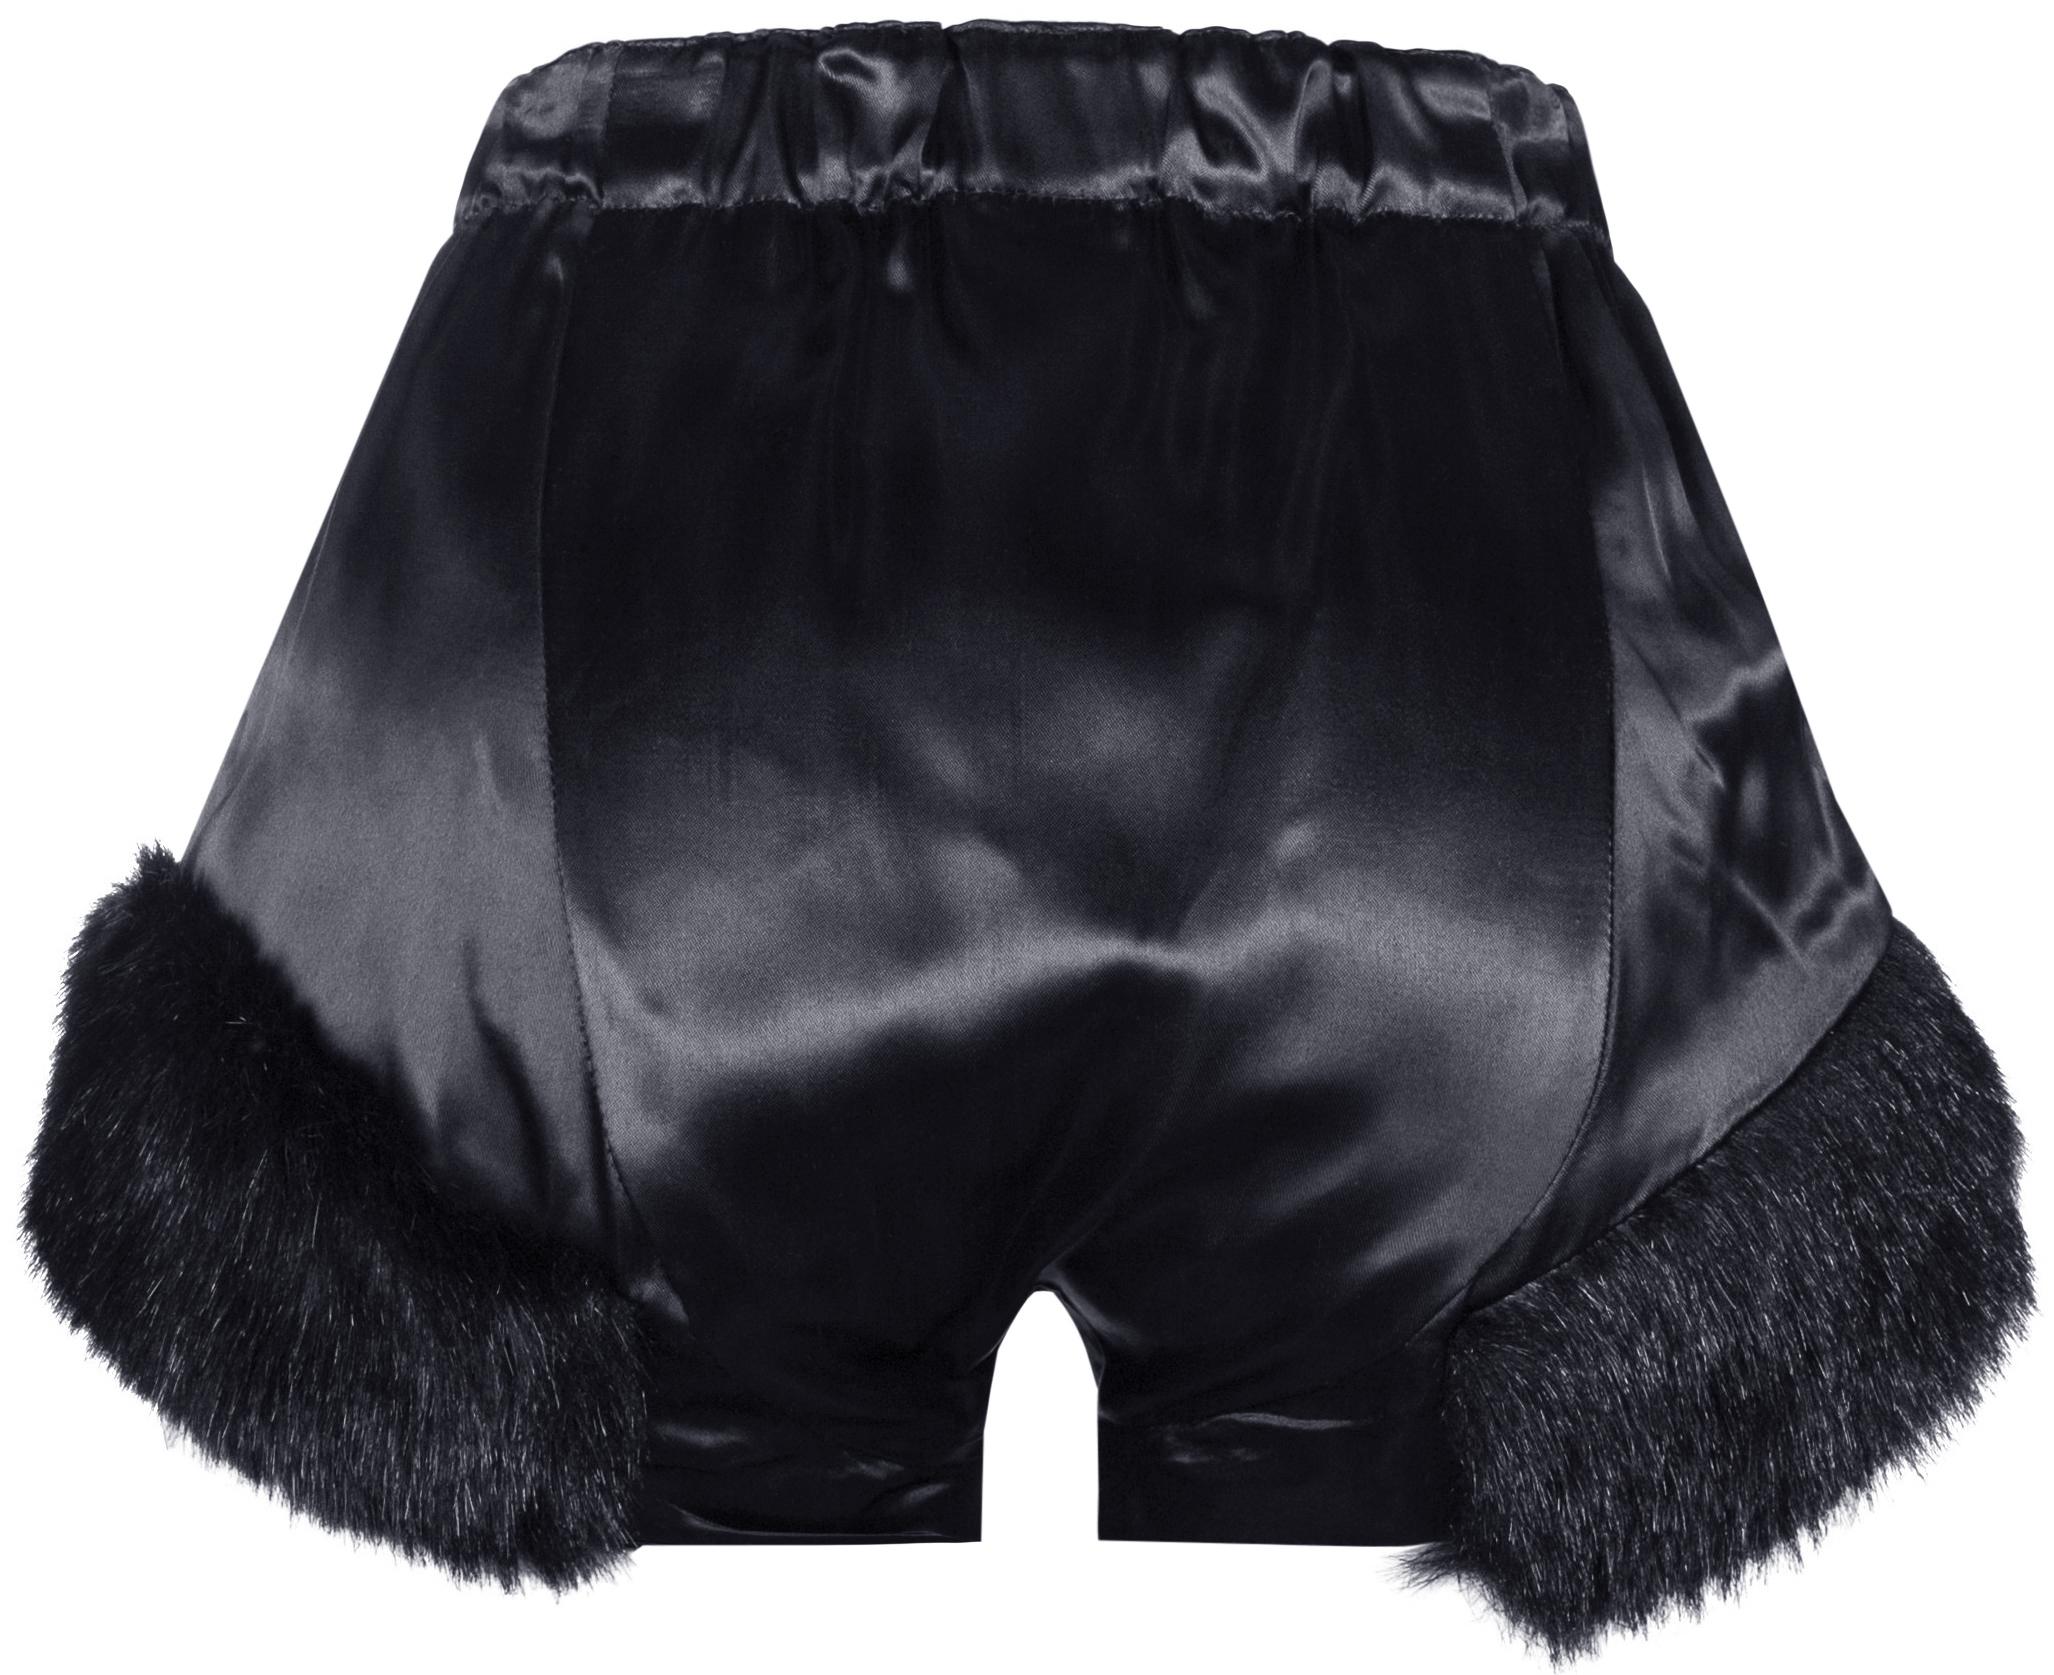 Stretchy hot pants in black satin adorned with faux fur trim, an elasticized waistband, and gold button orb detailing from the fall 1991/1992 